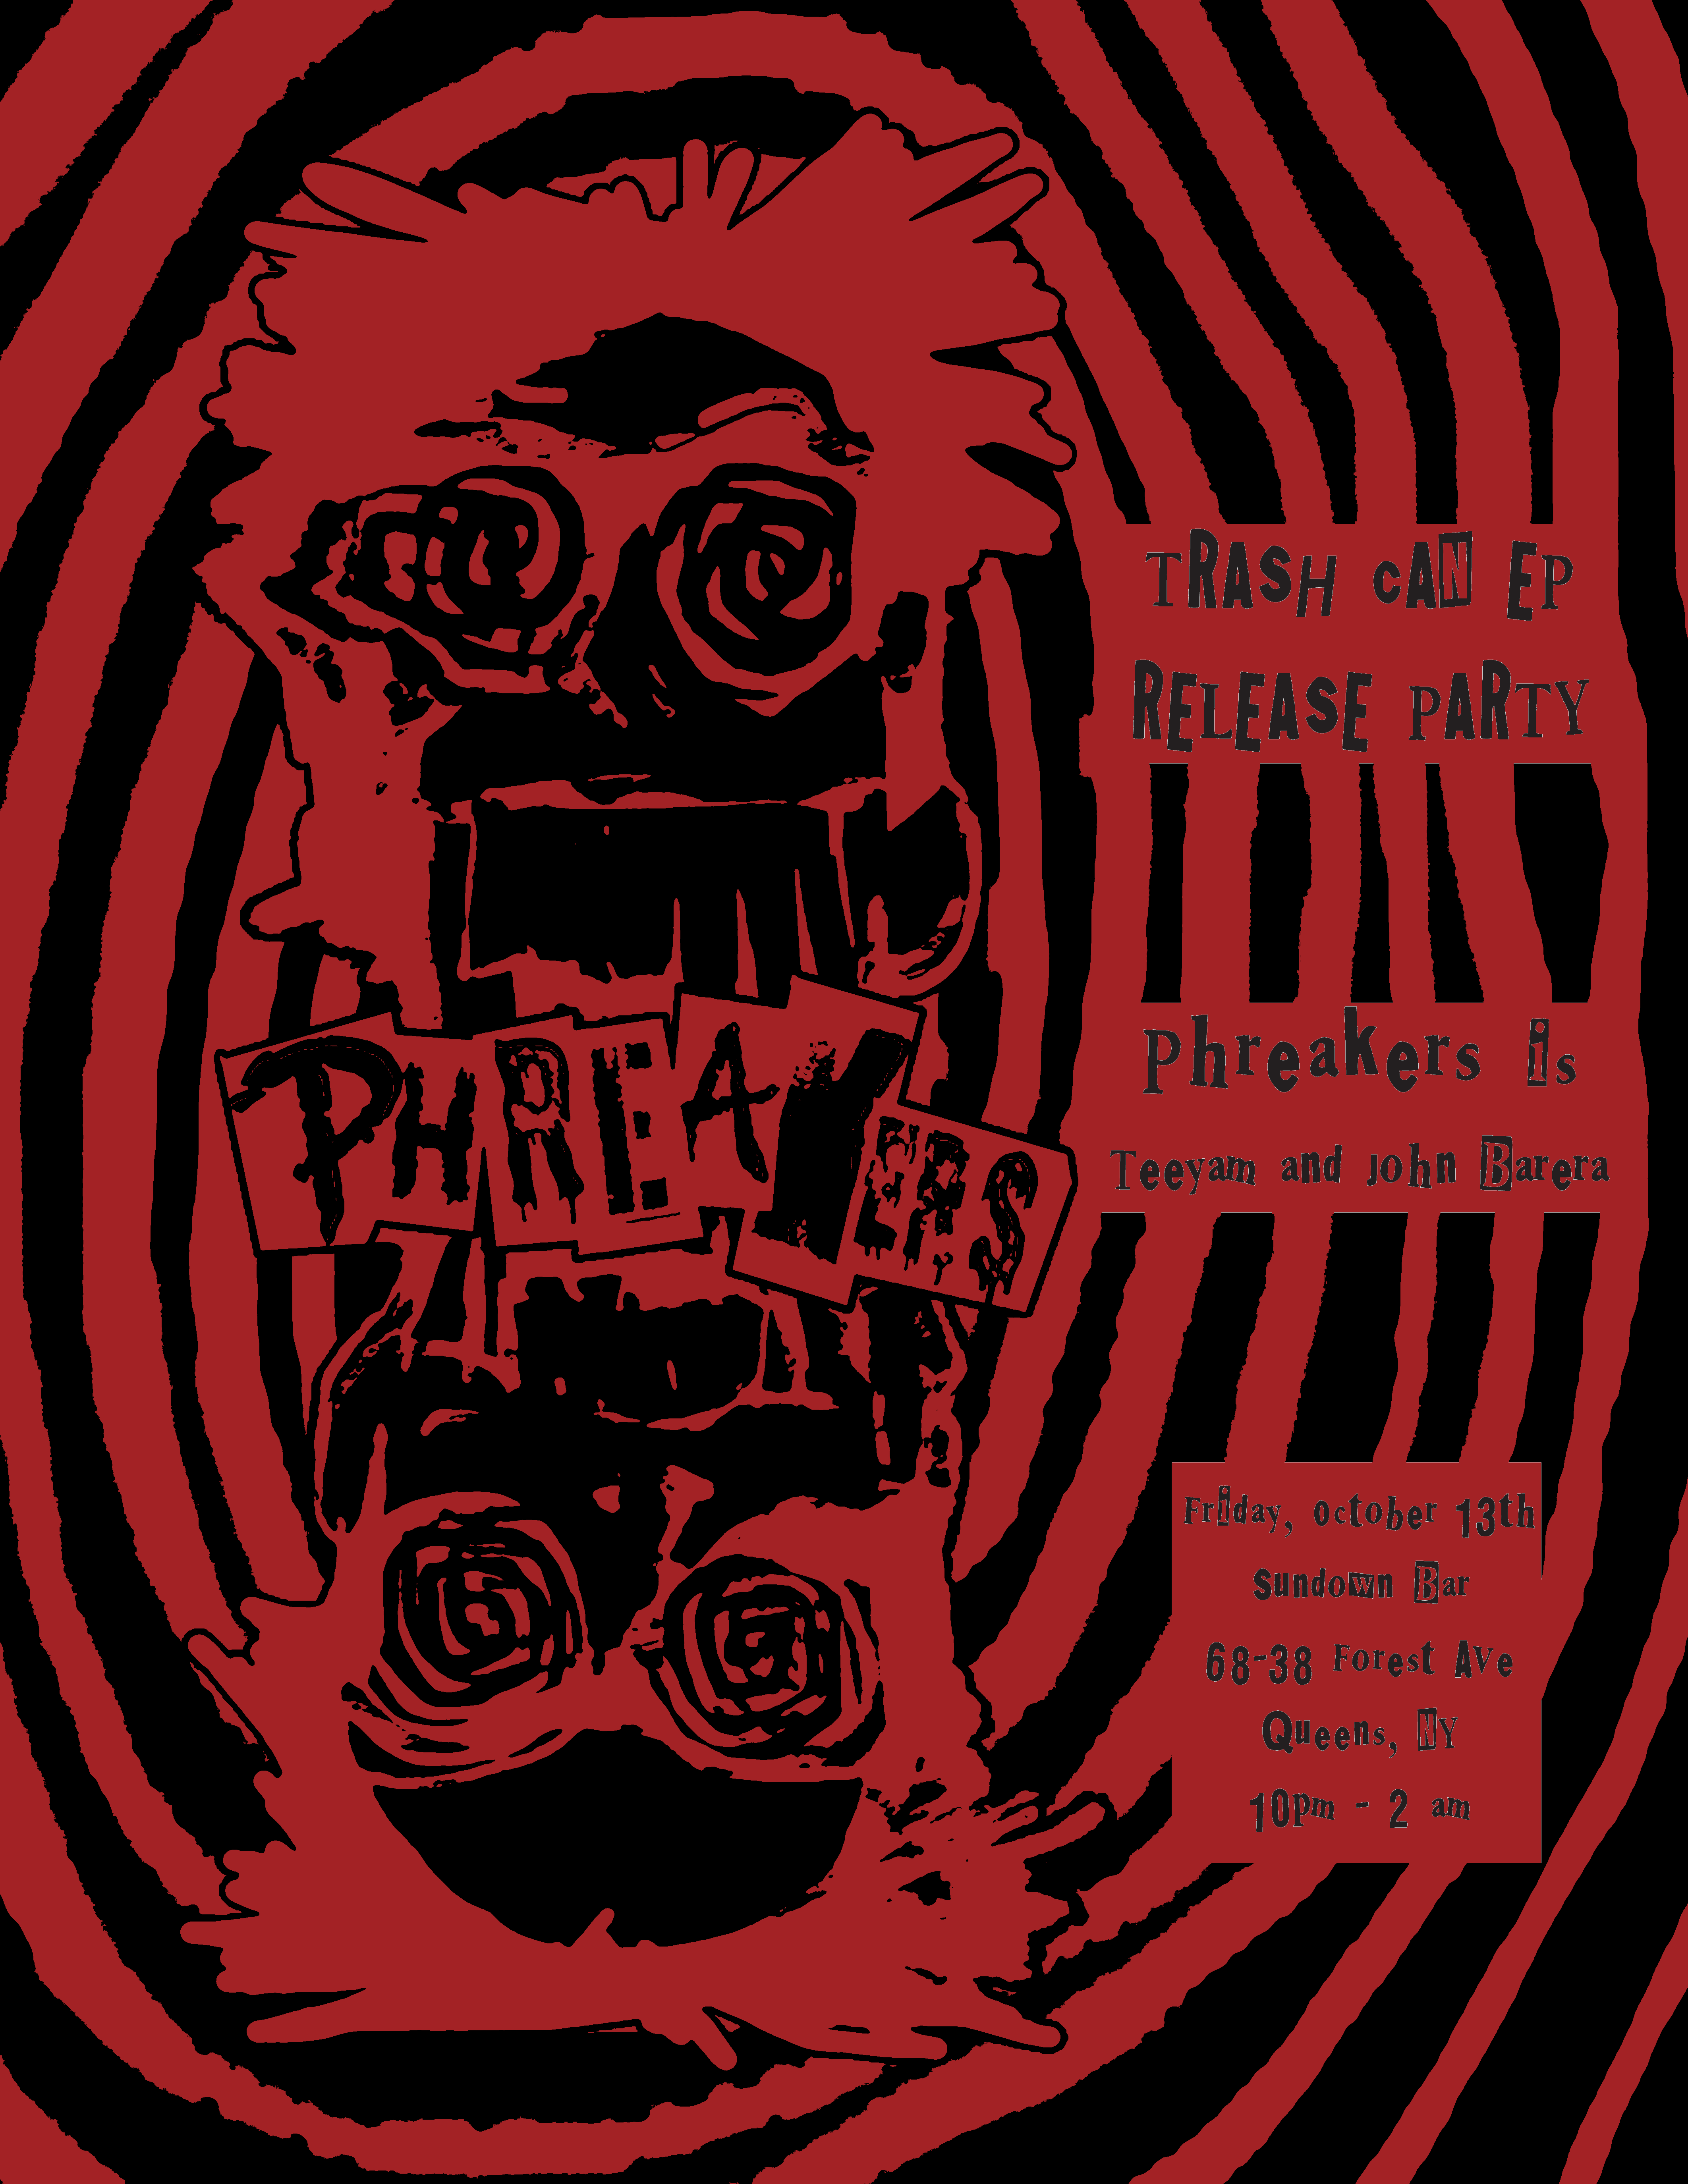 PHREAKERS - TRASH CAN EP (Release Party) - Página frontal